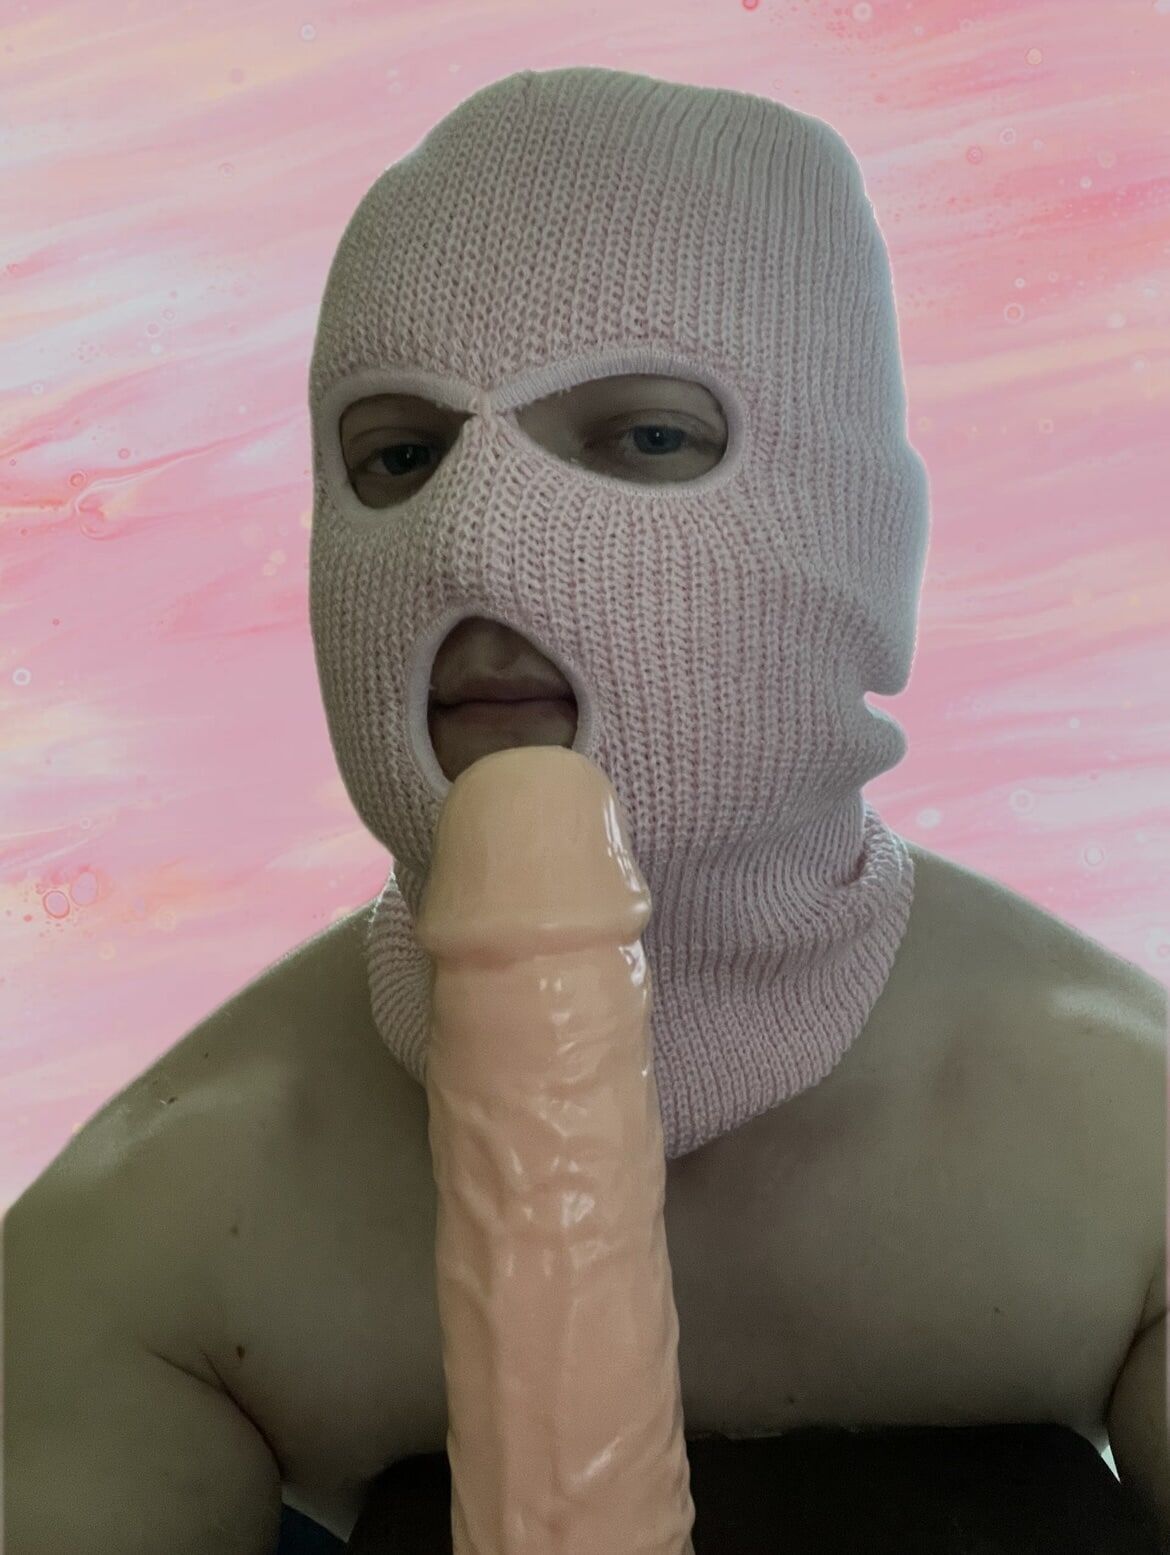 Playing with a dildo in a pink mask